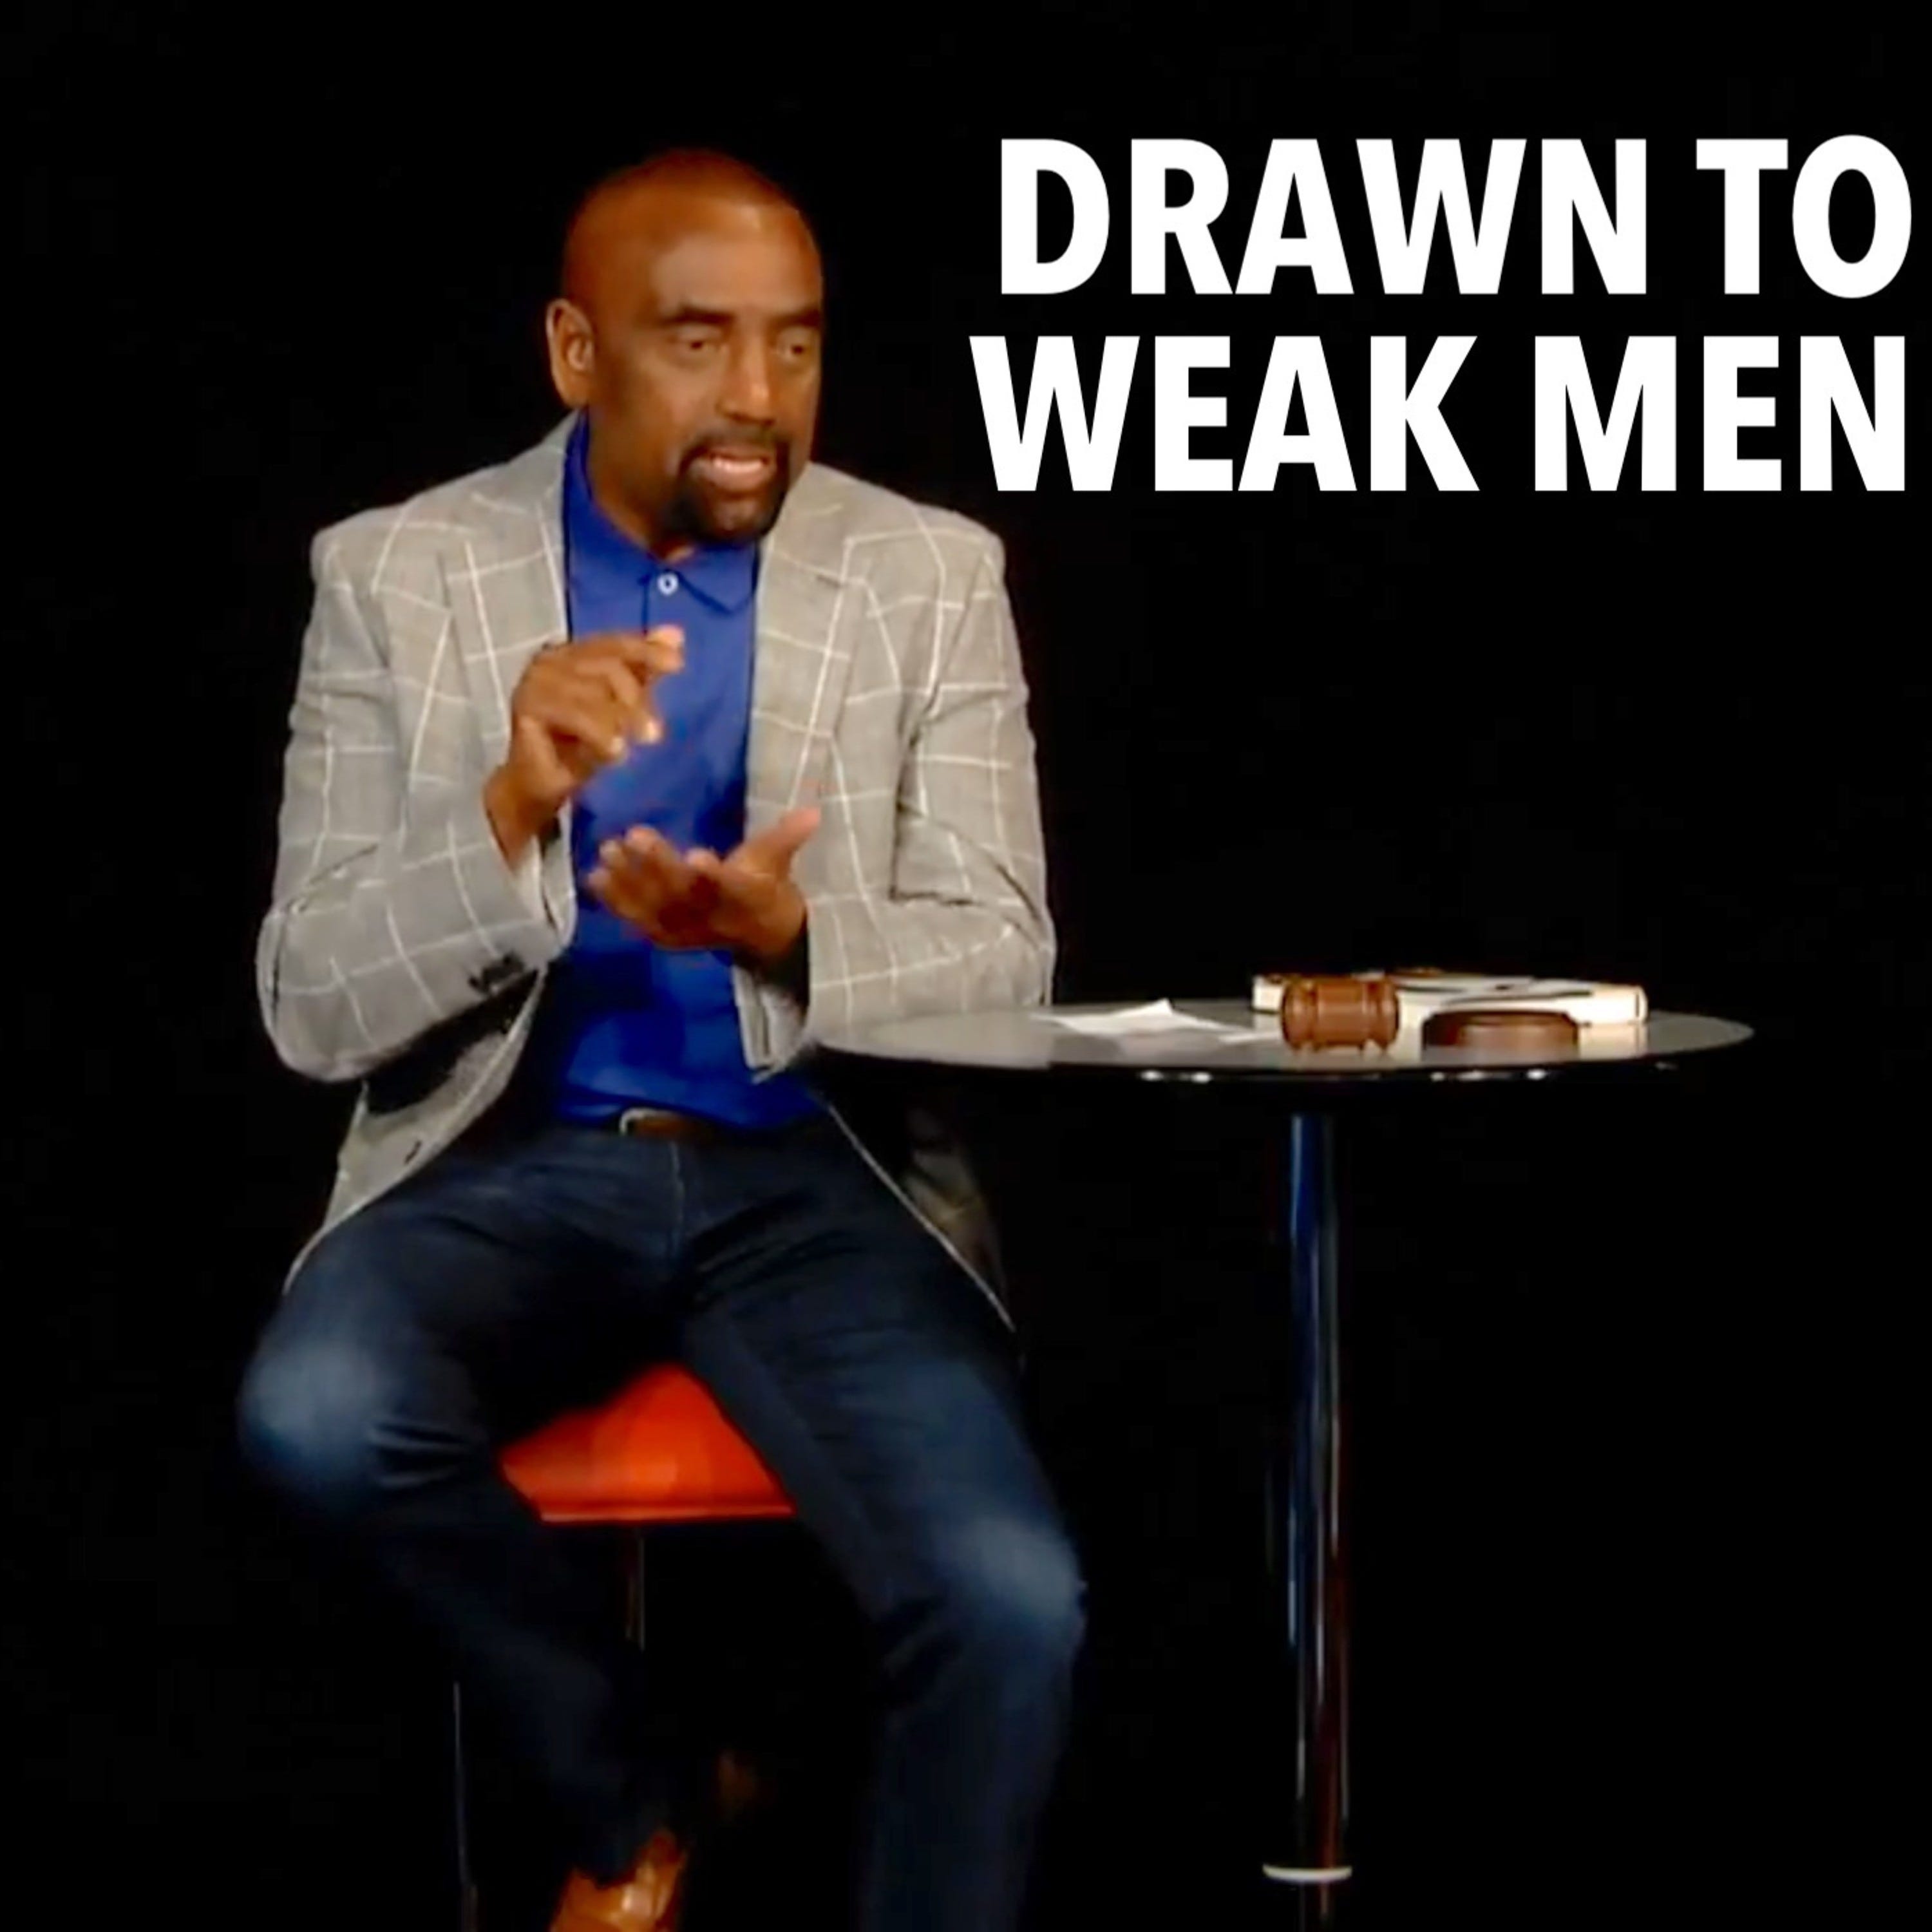 Why Are Women Drawn to Weak Men? (Church, May 20)